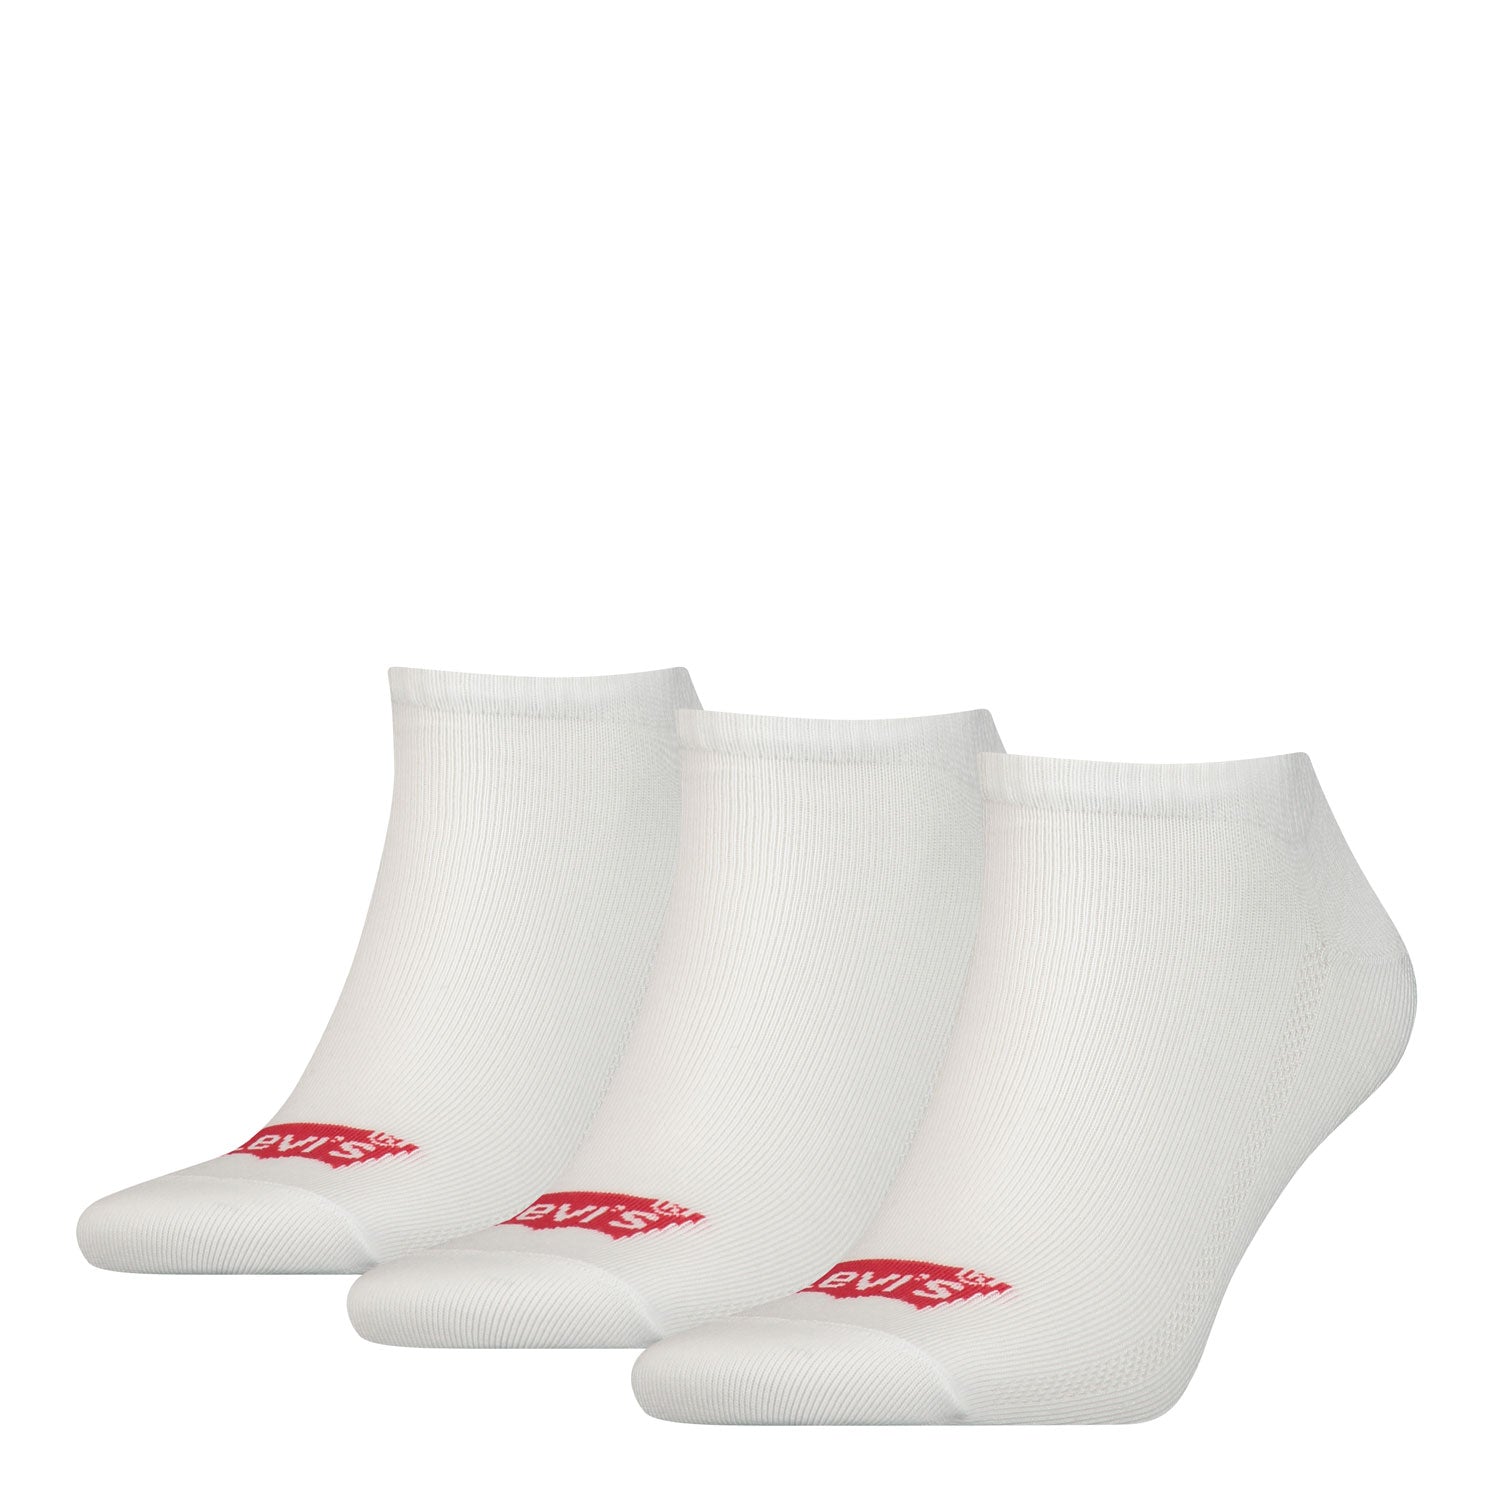 Levis Levis Low Cut Batwing Logo 3 Pack Socks - White 1 Shaws Department Stores